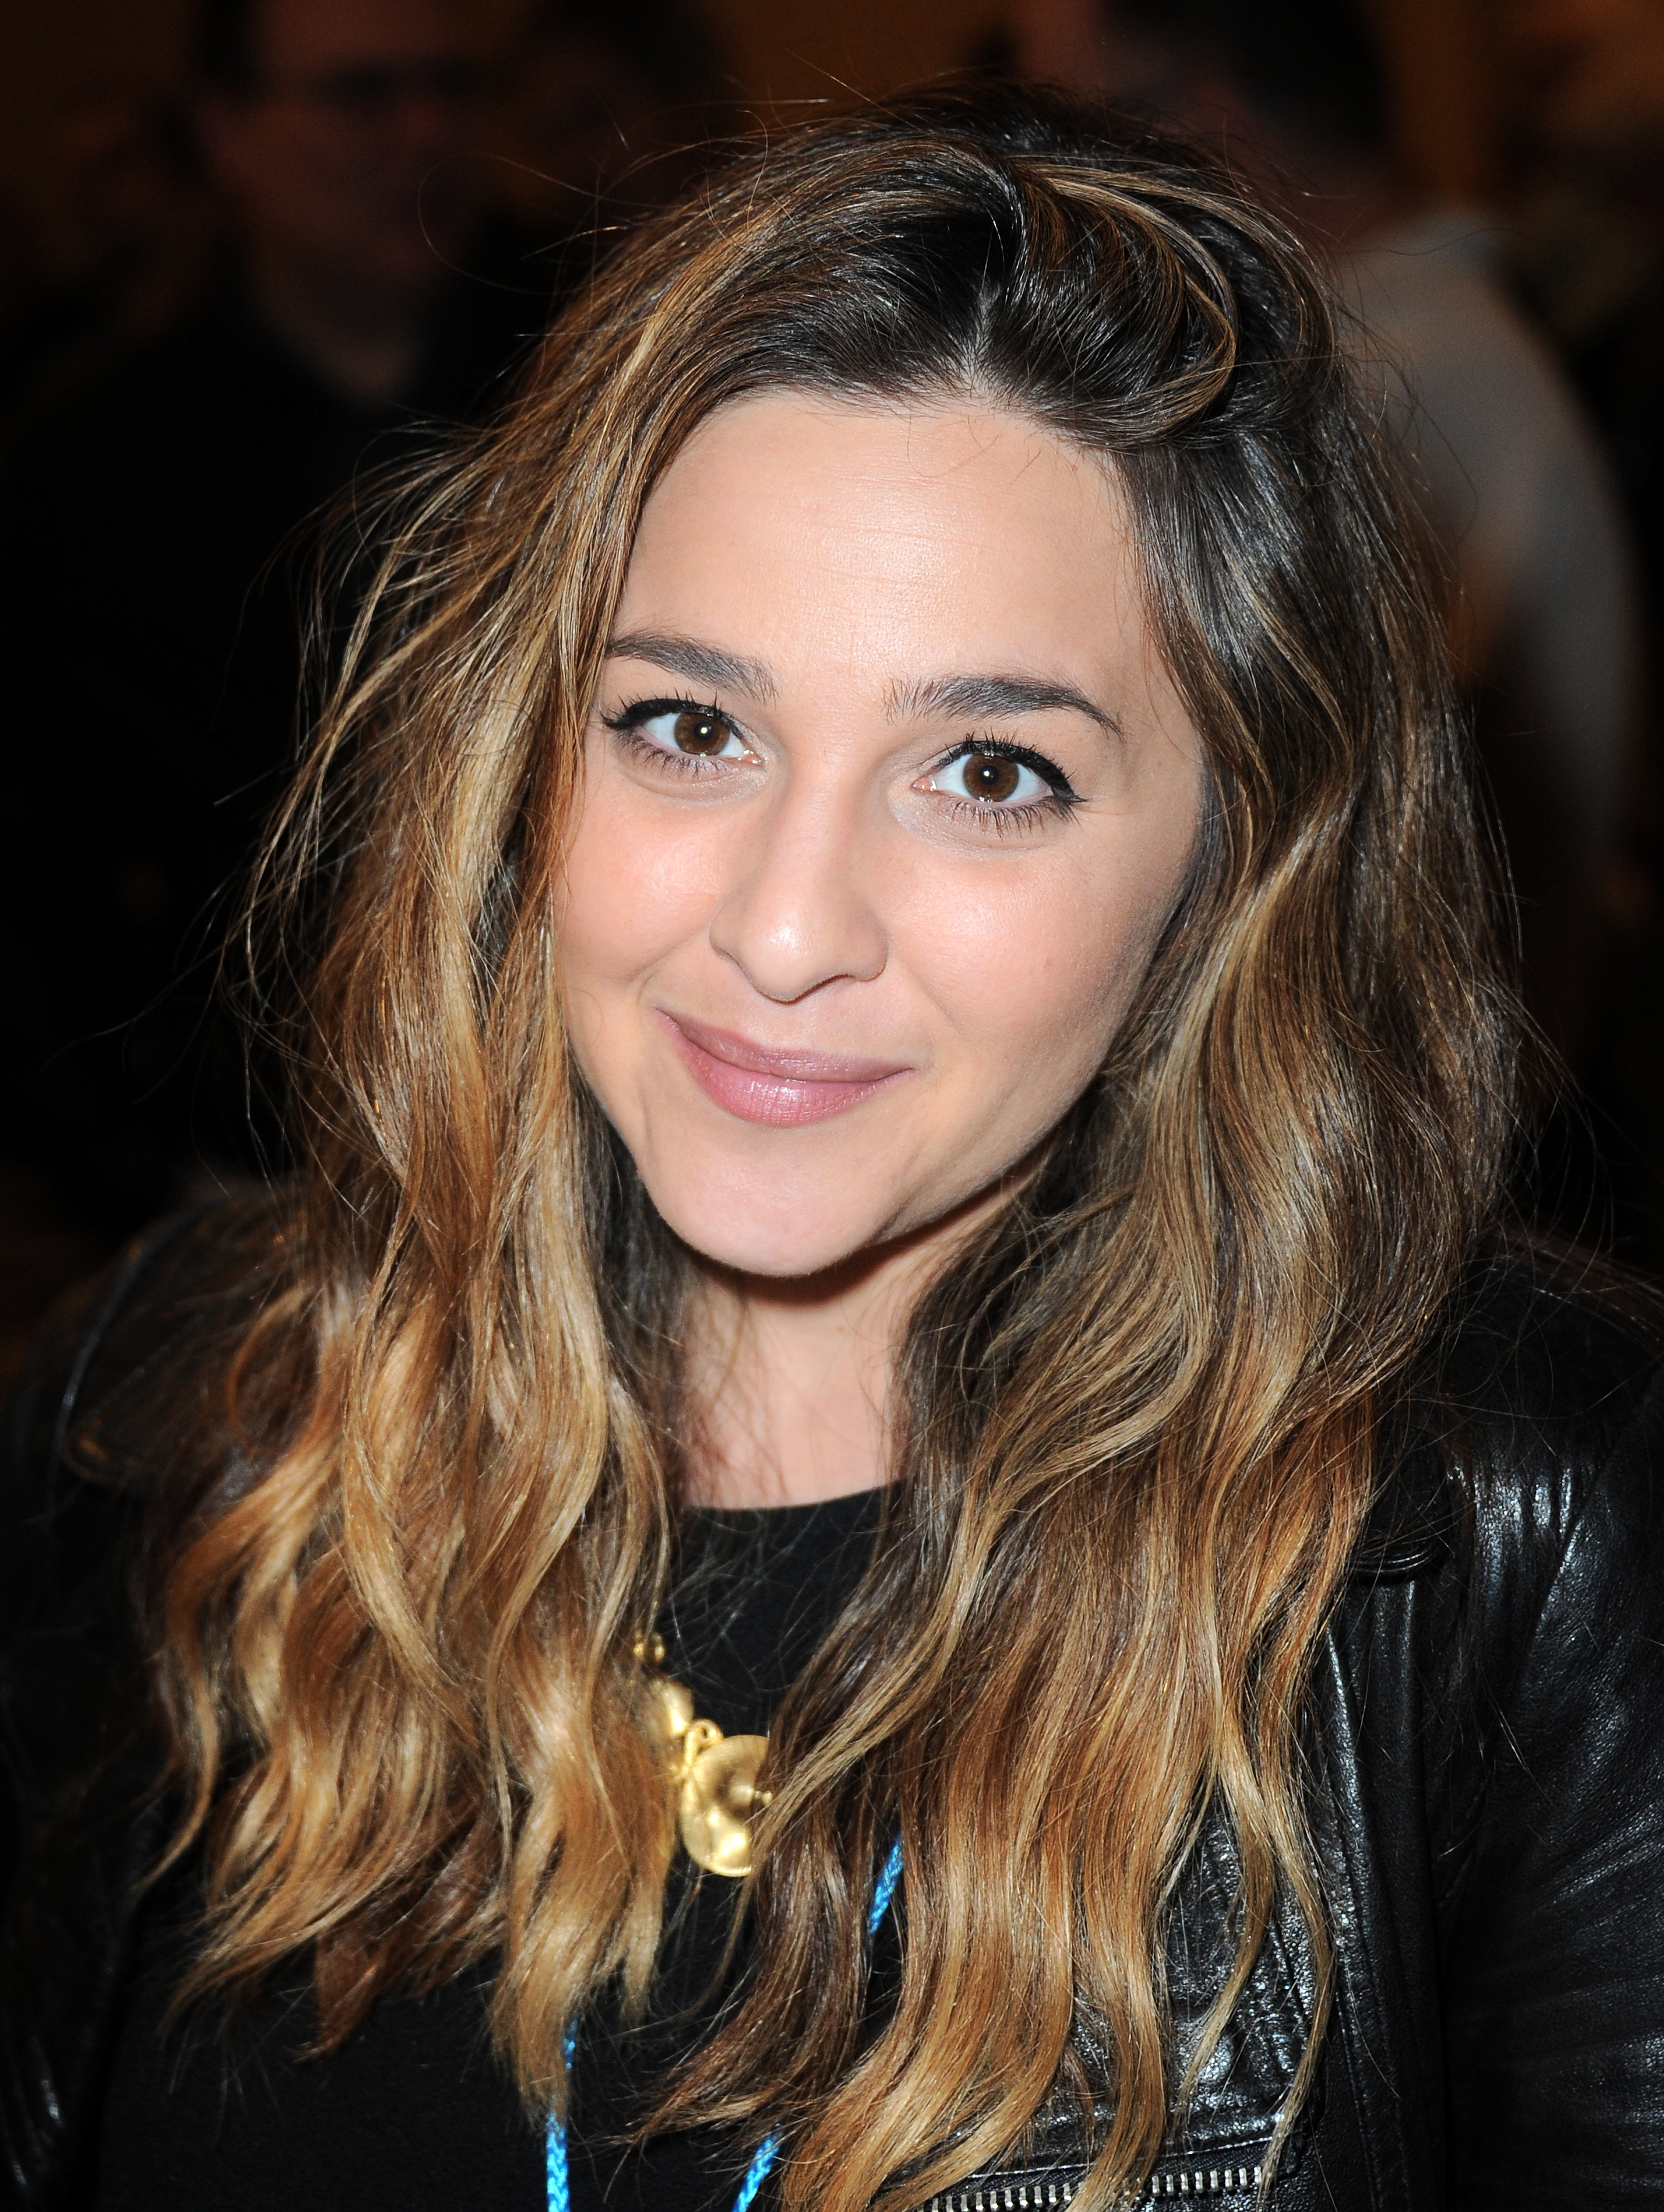 Alisan Porter at The Hollywood Show held in Los Angeles, California, on April 25, 2015. | Source: Getty Images